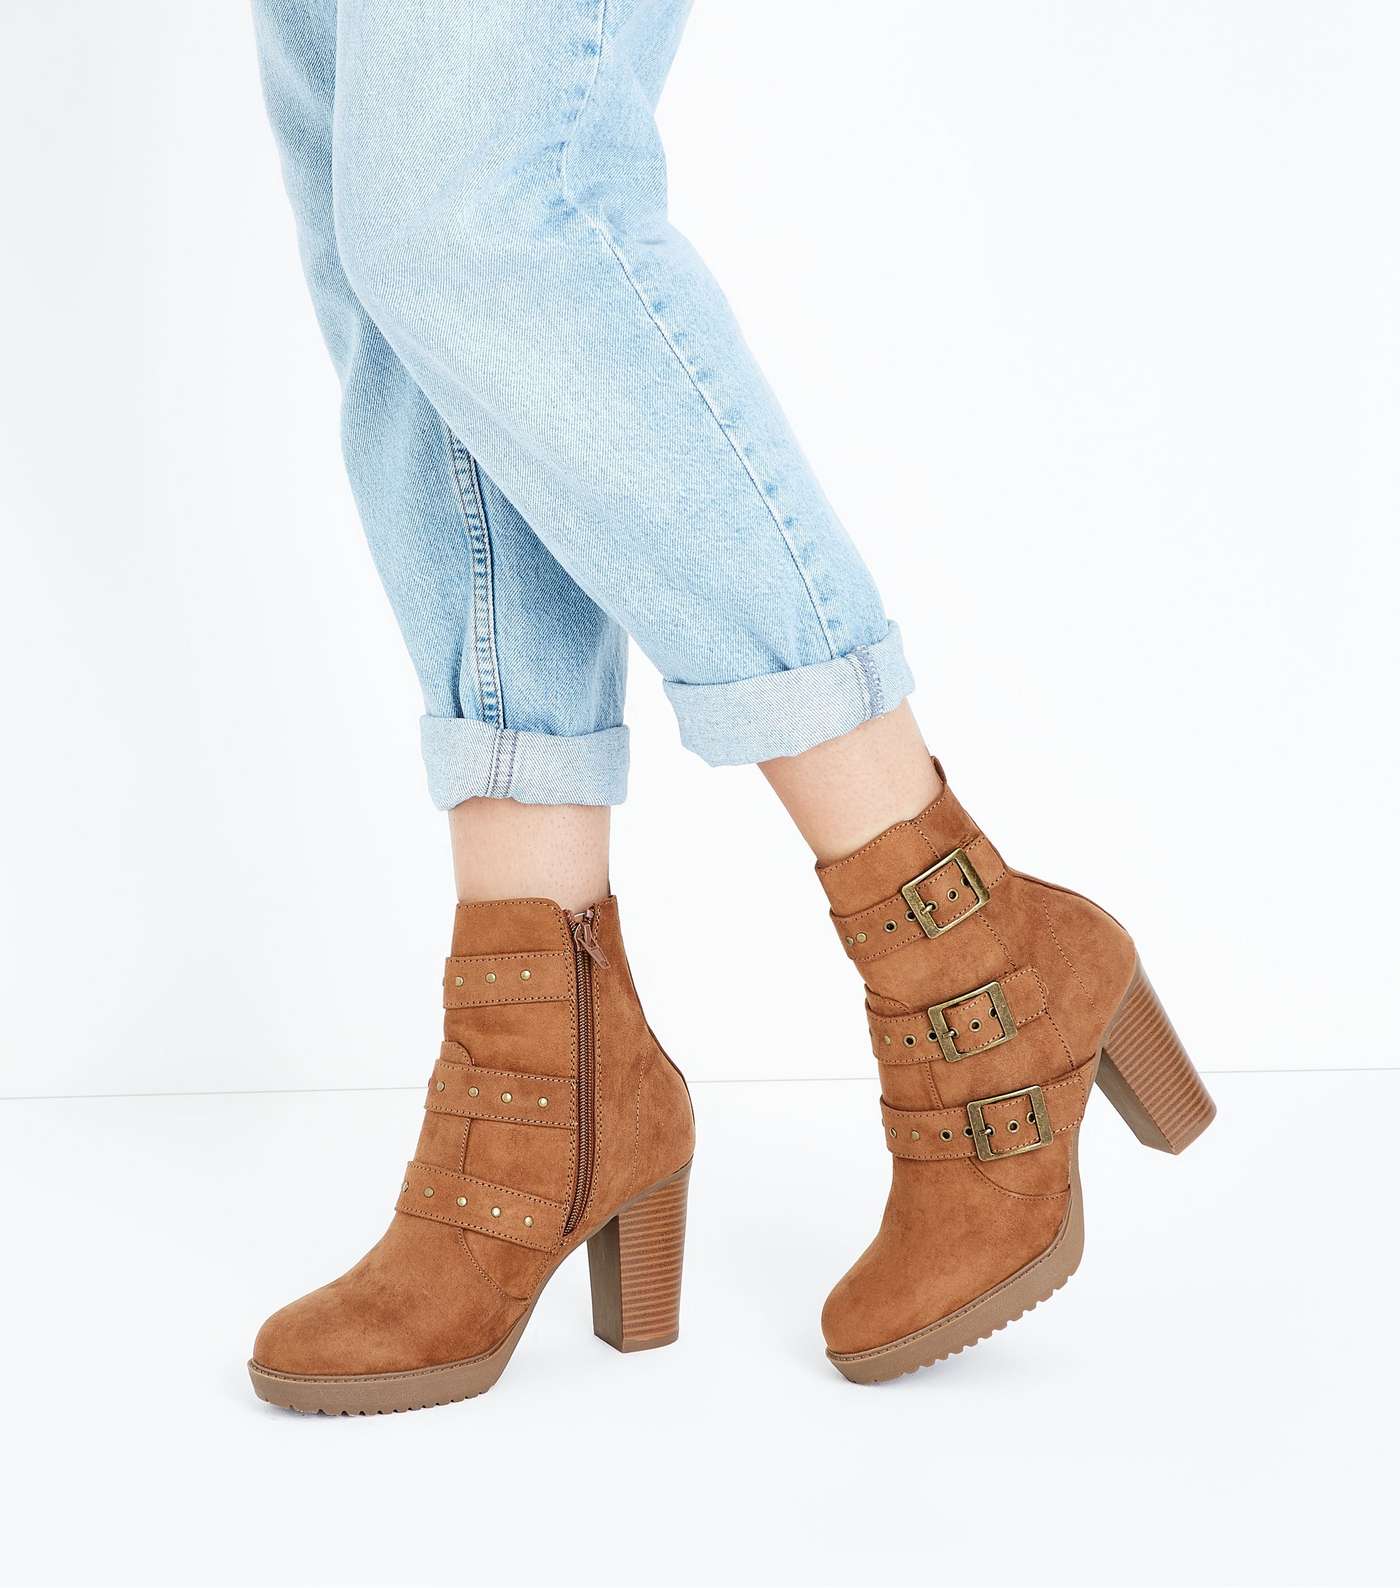 Tan Suedette Stud Buckle Heeled Ankle Boots Image 3